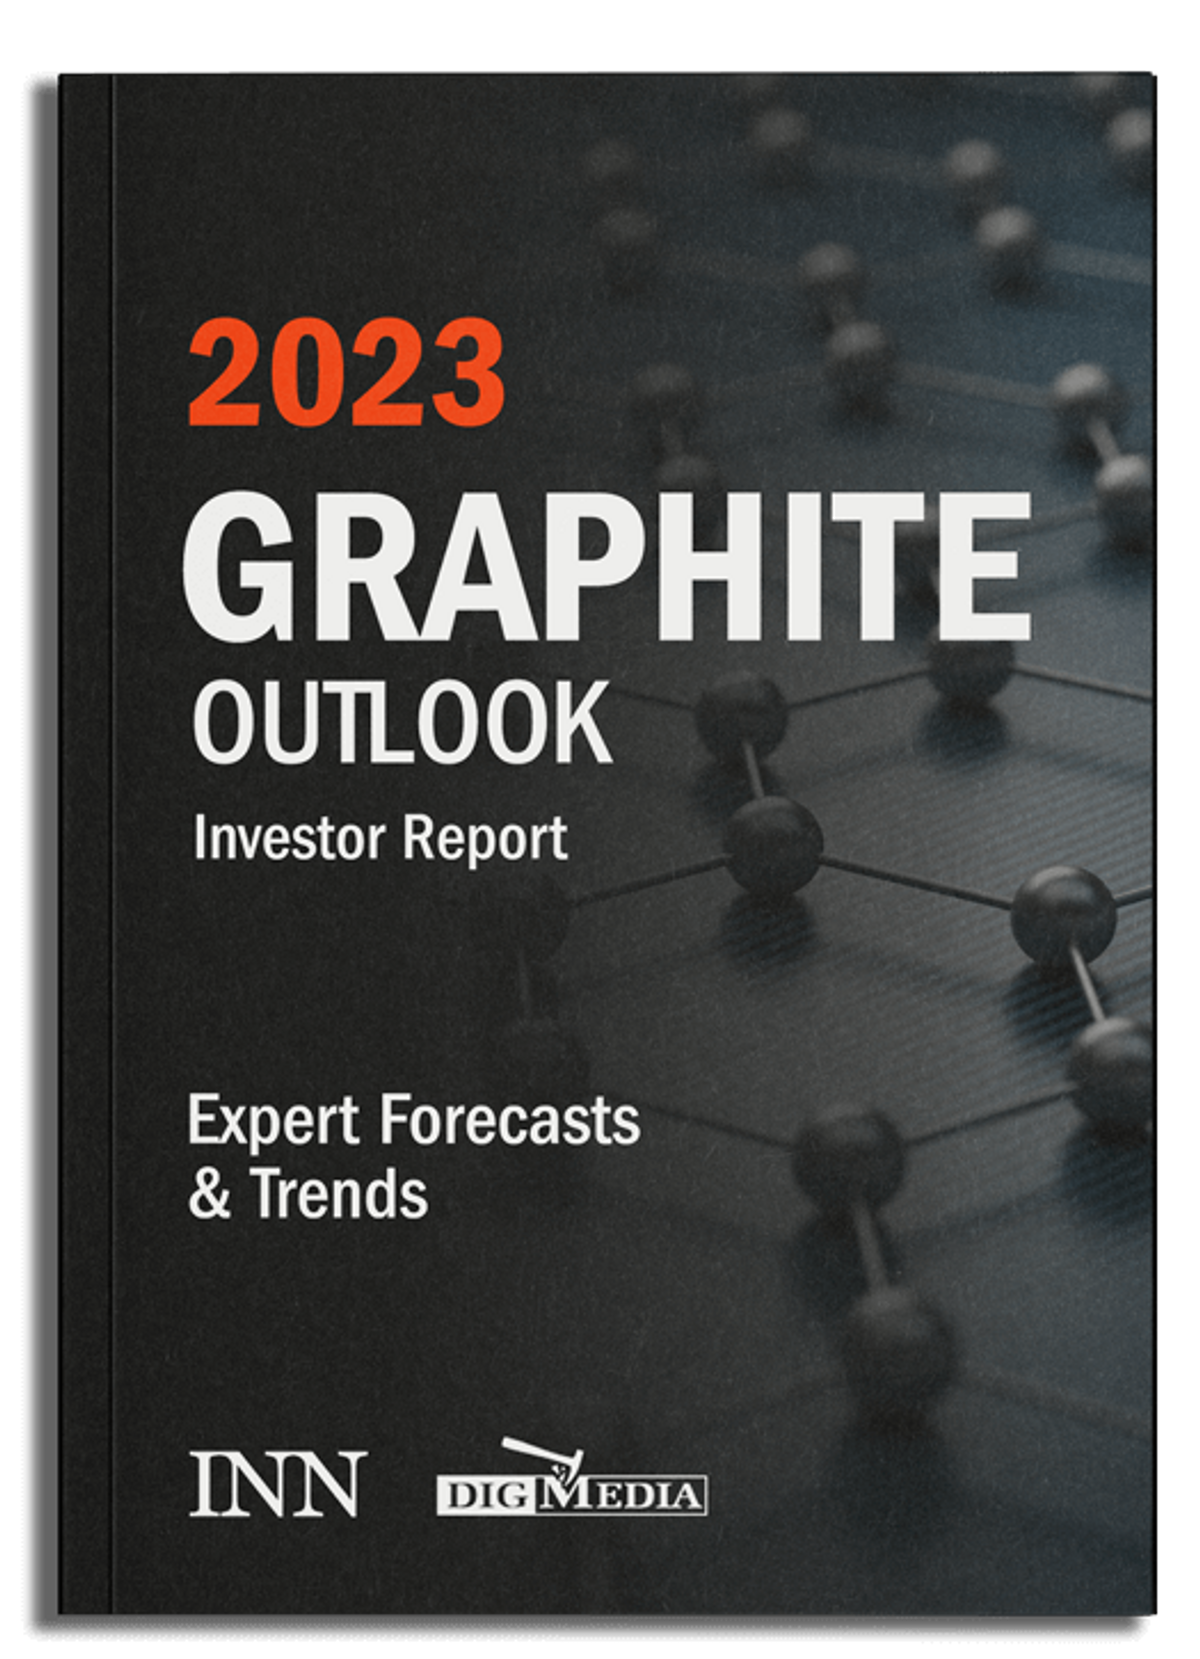 2023 Graphite Outlook Report